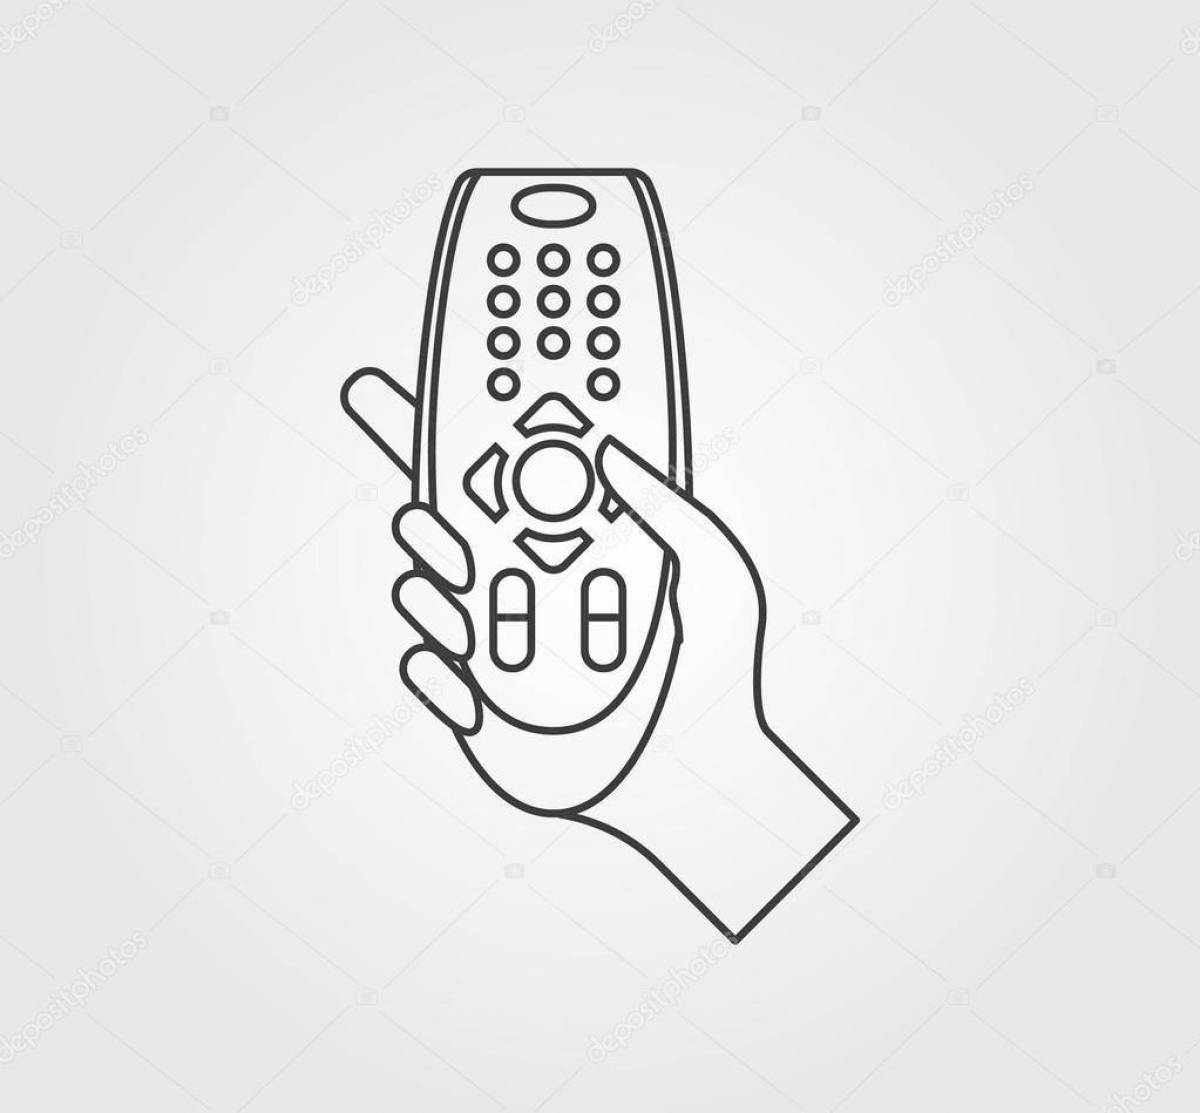 Animated remote control coloring page